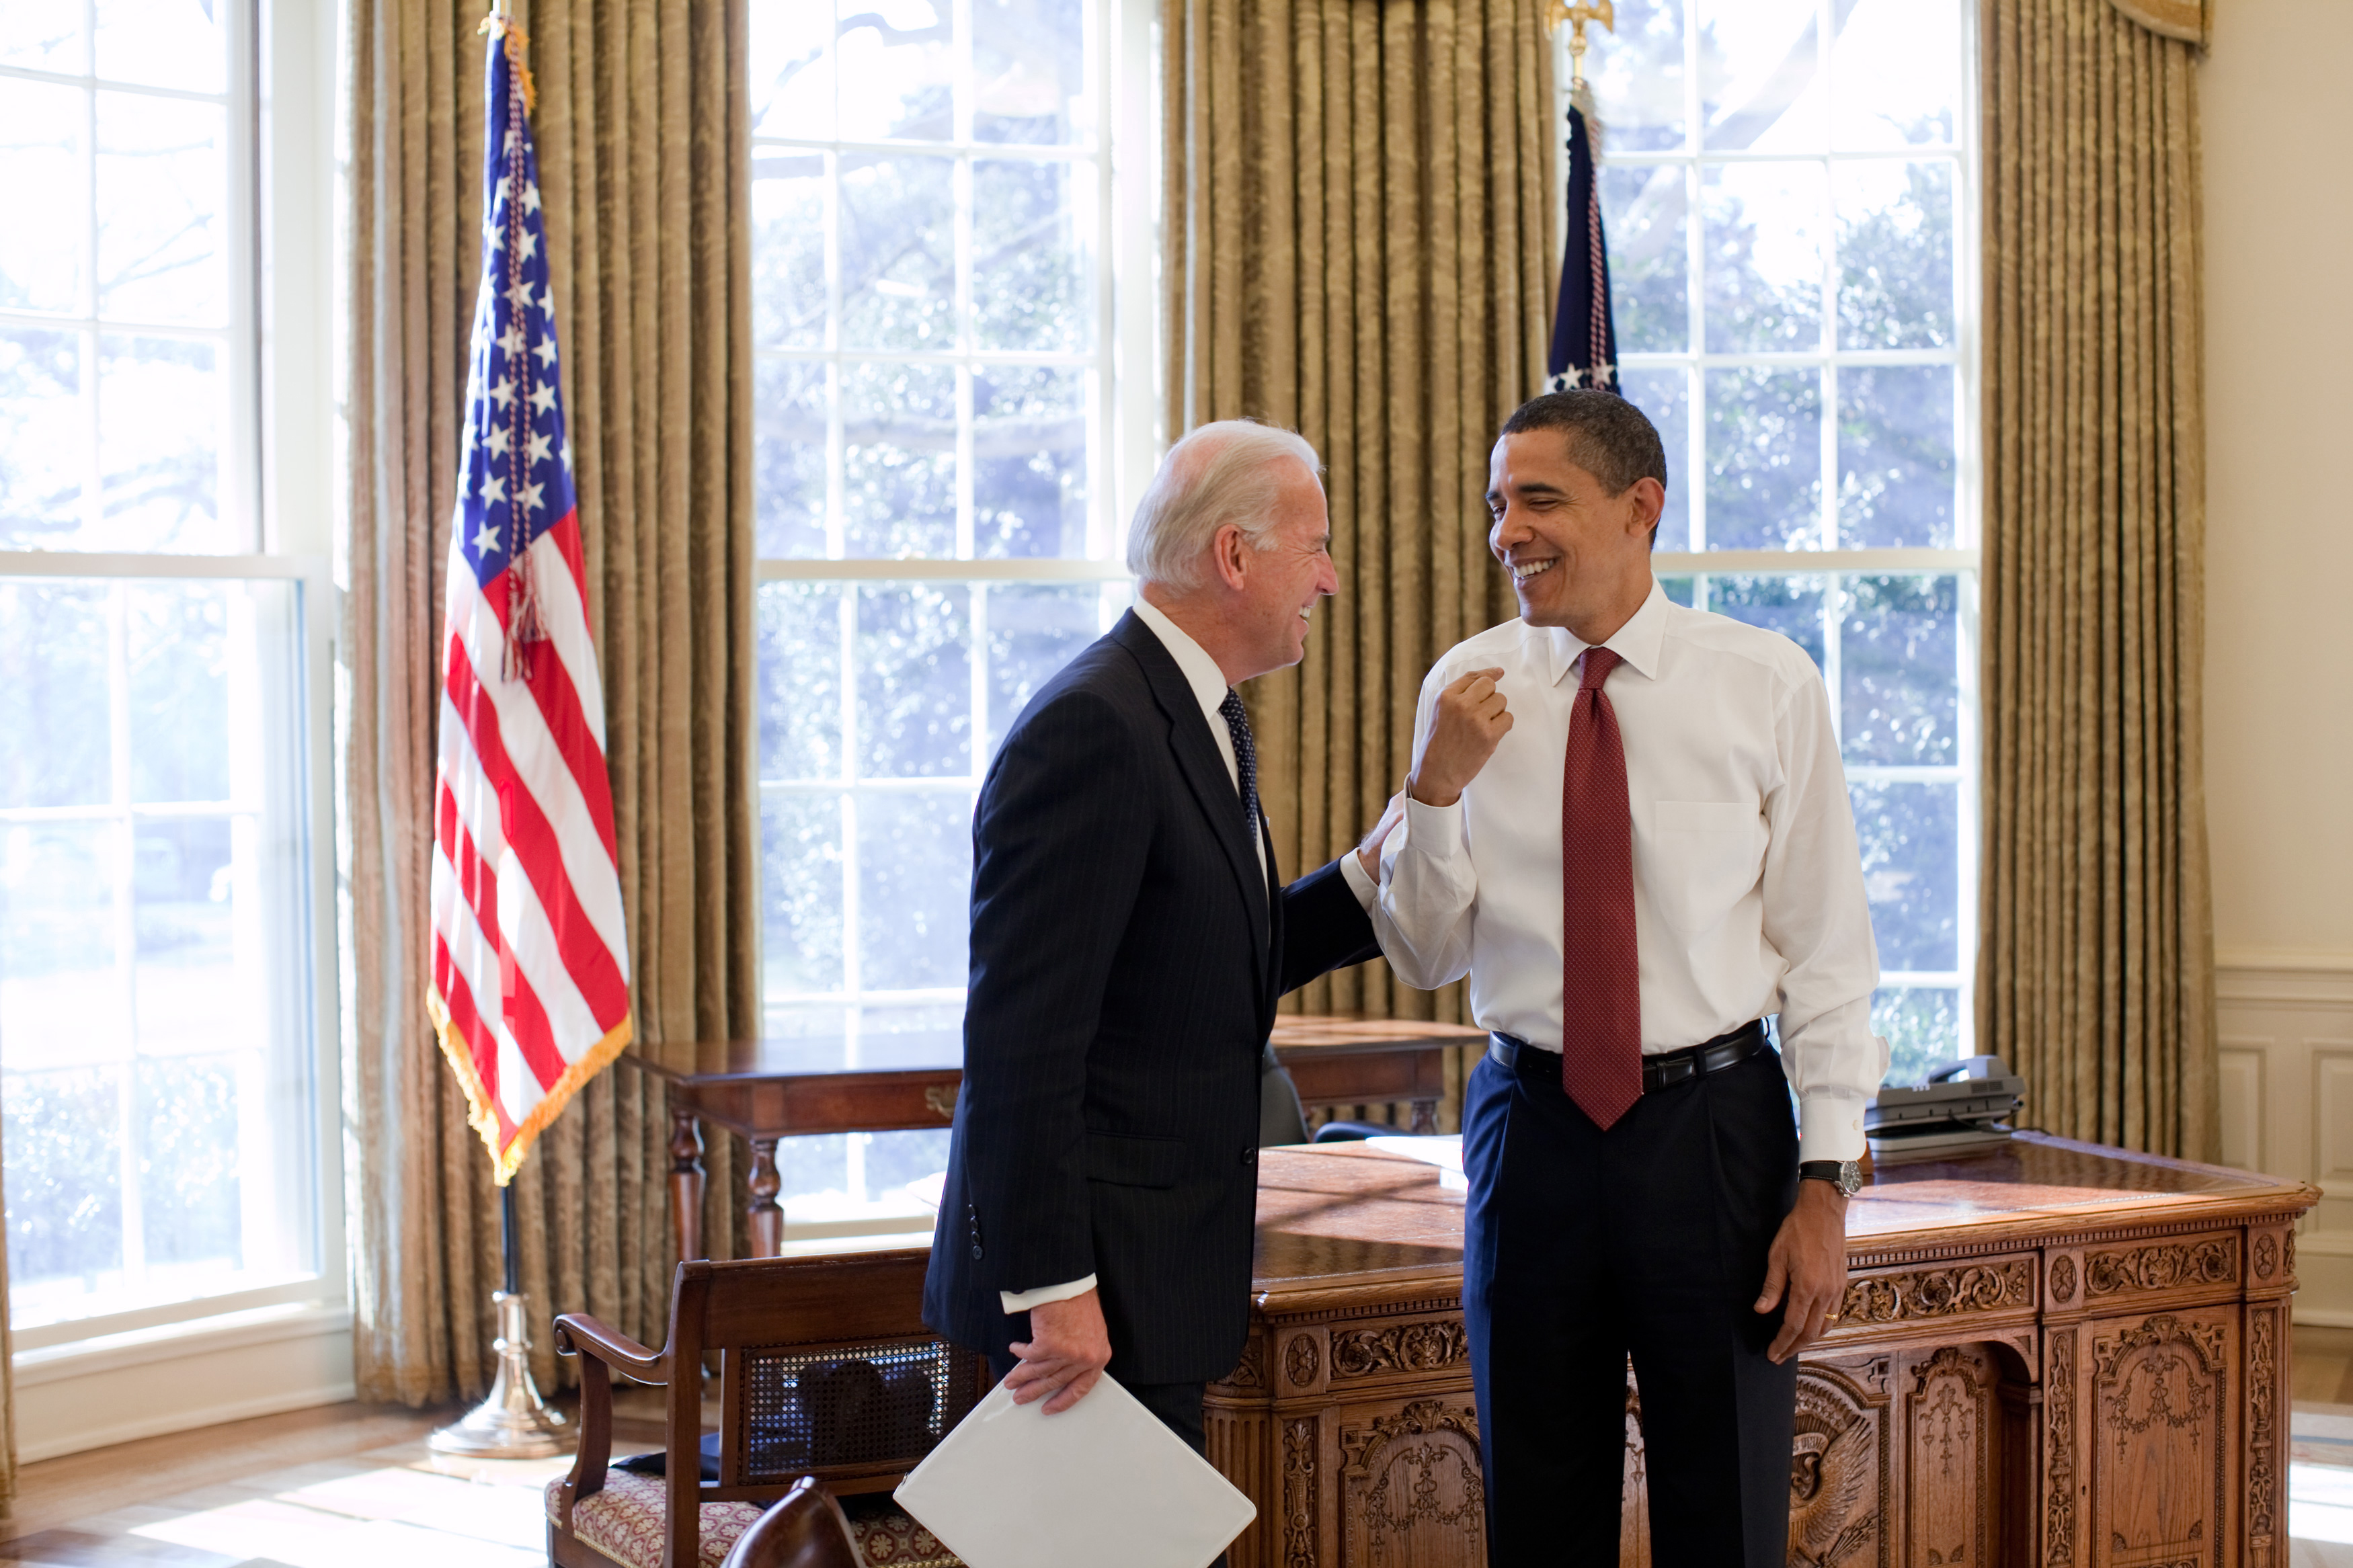 President Barack Obama and Vice President Joe Biden laugh together in the Oval Office, 1/22/09. . (Photo by: HUM Images/Universal Images Group via Getty Images)